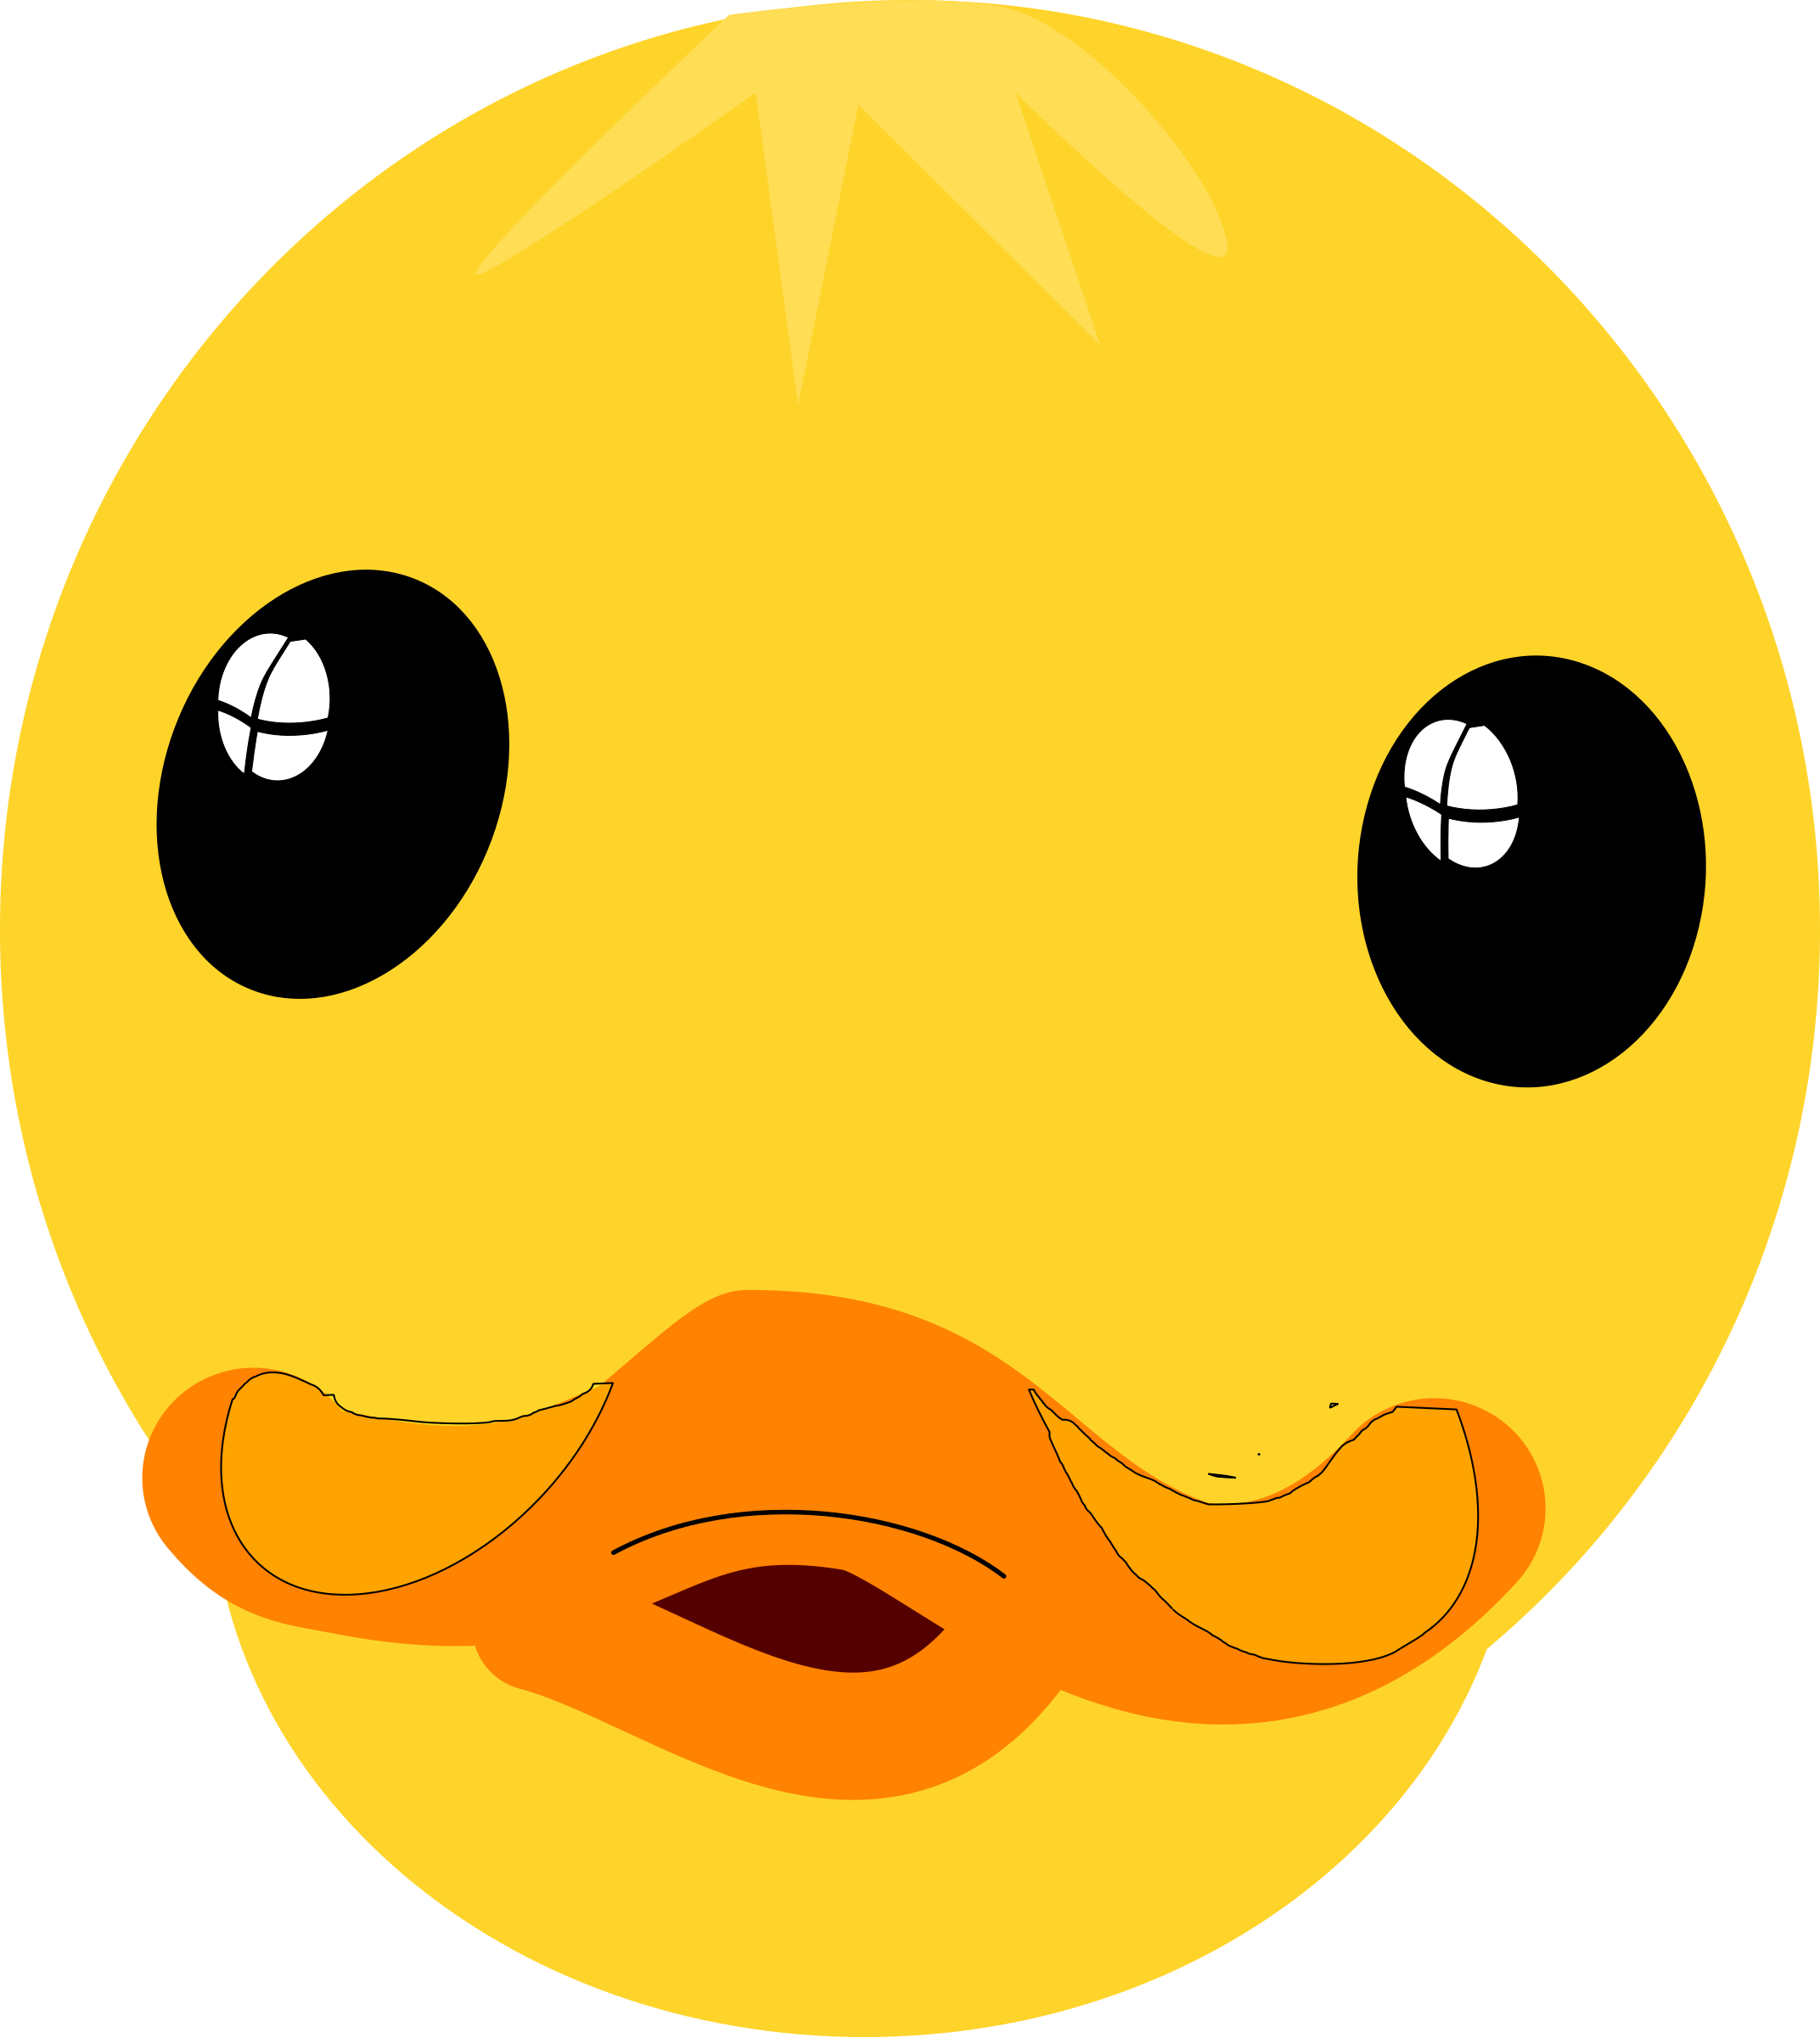 Duck clipart eye. Remote control car at